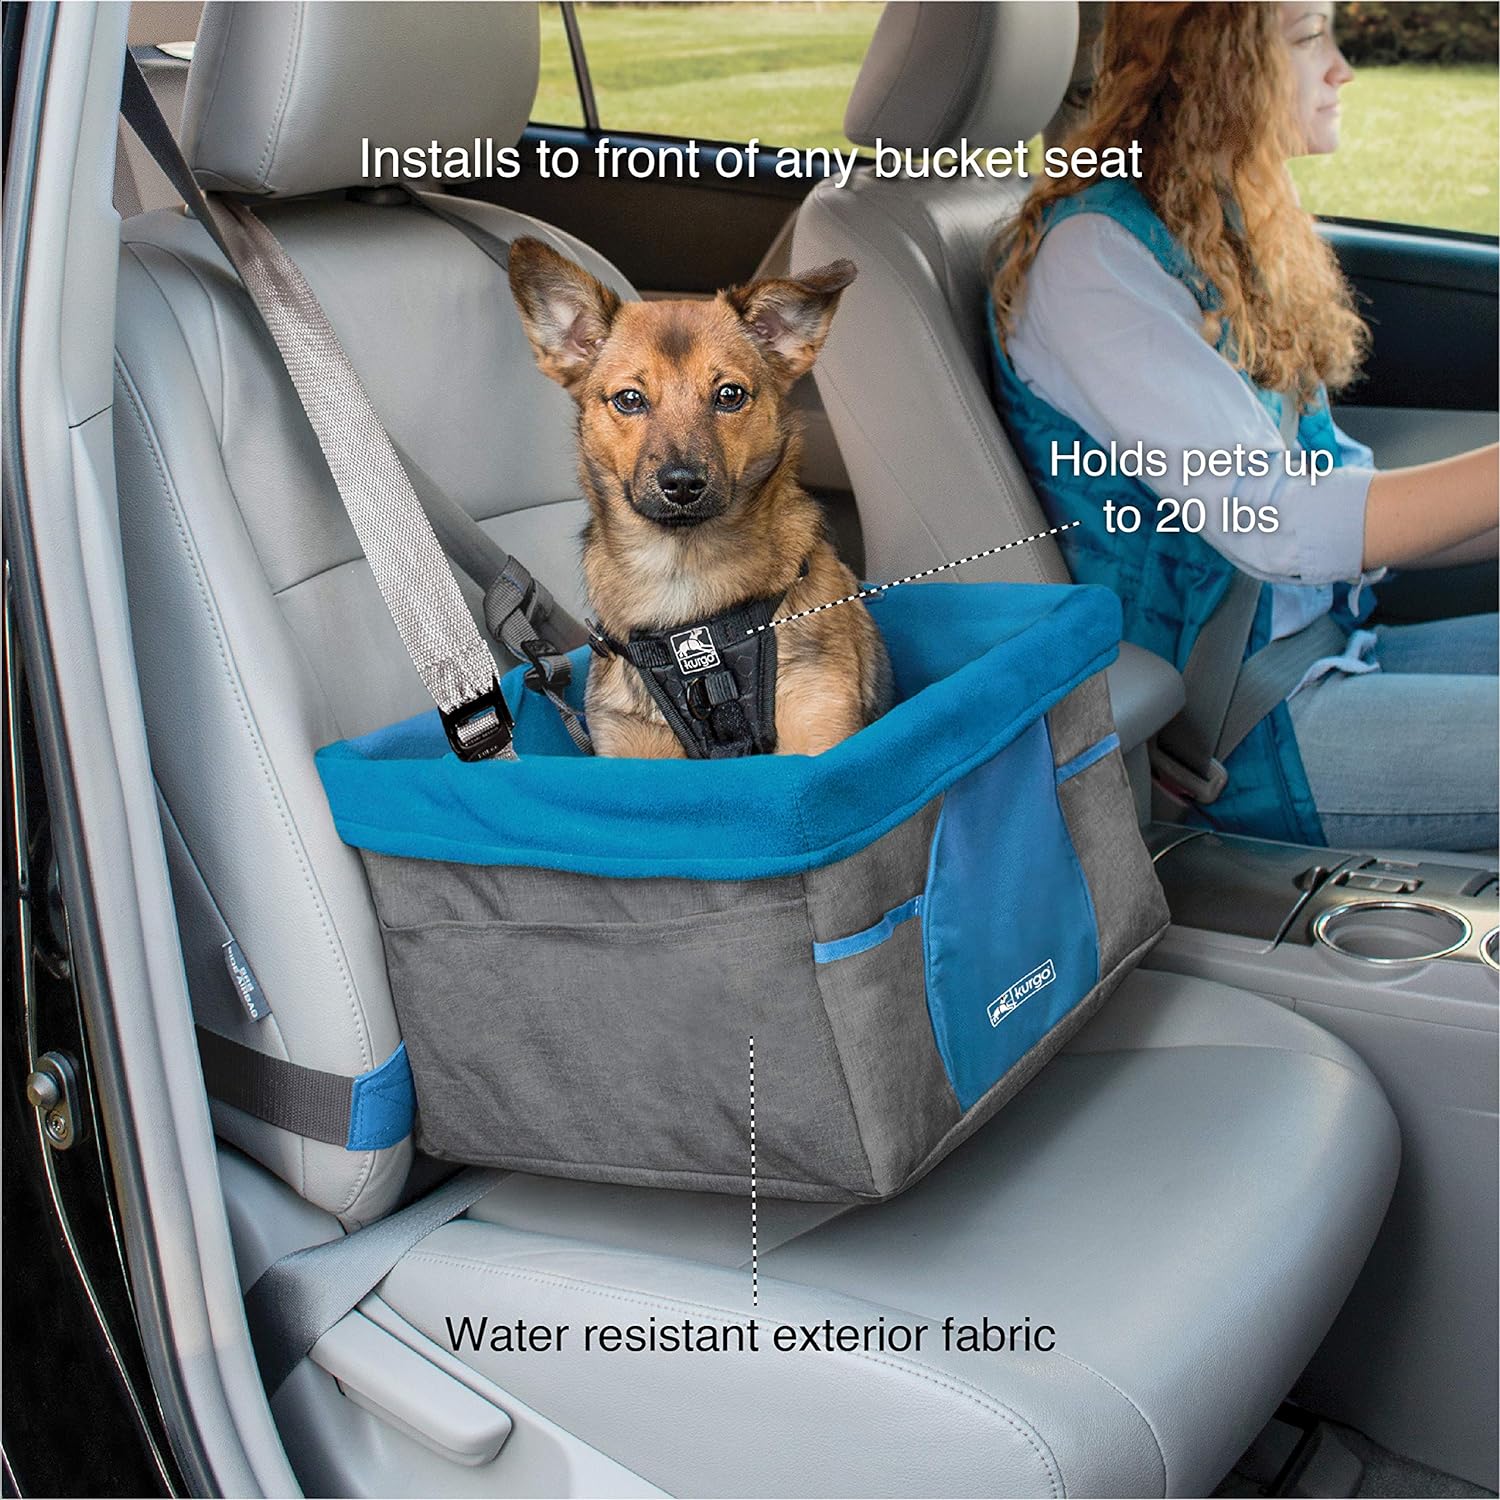 Kurgo Dog Booster Seats for Cars - Pet Car Seats for Small Dogs and Puppies Weighing Under 30 lbs - Headrest Mounted - Dog Car Seat Belt Tether Included - Heather Style, Charcoal/Blue